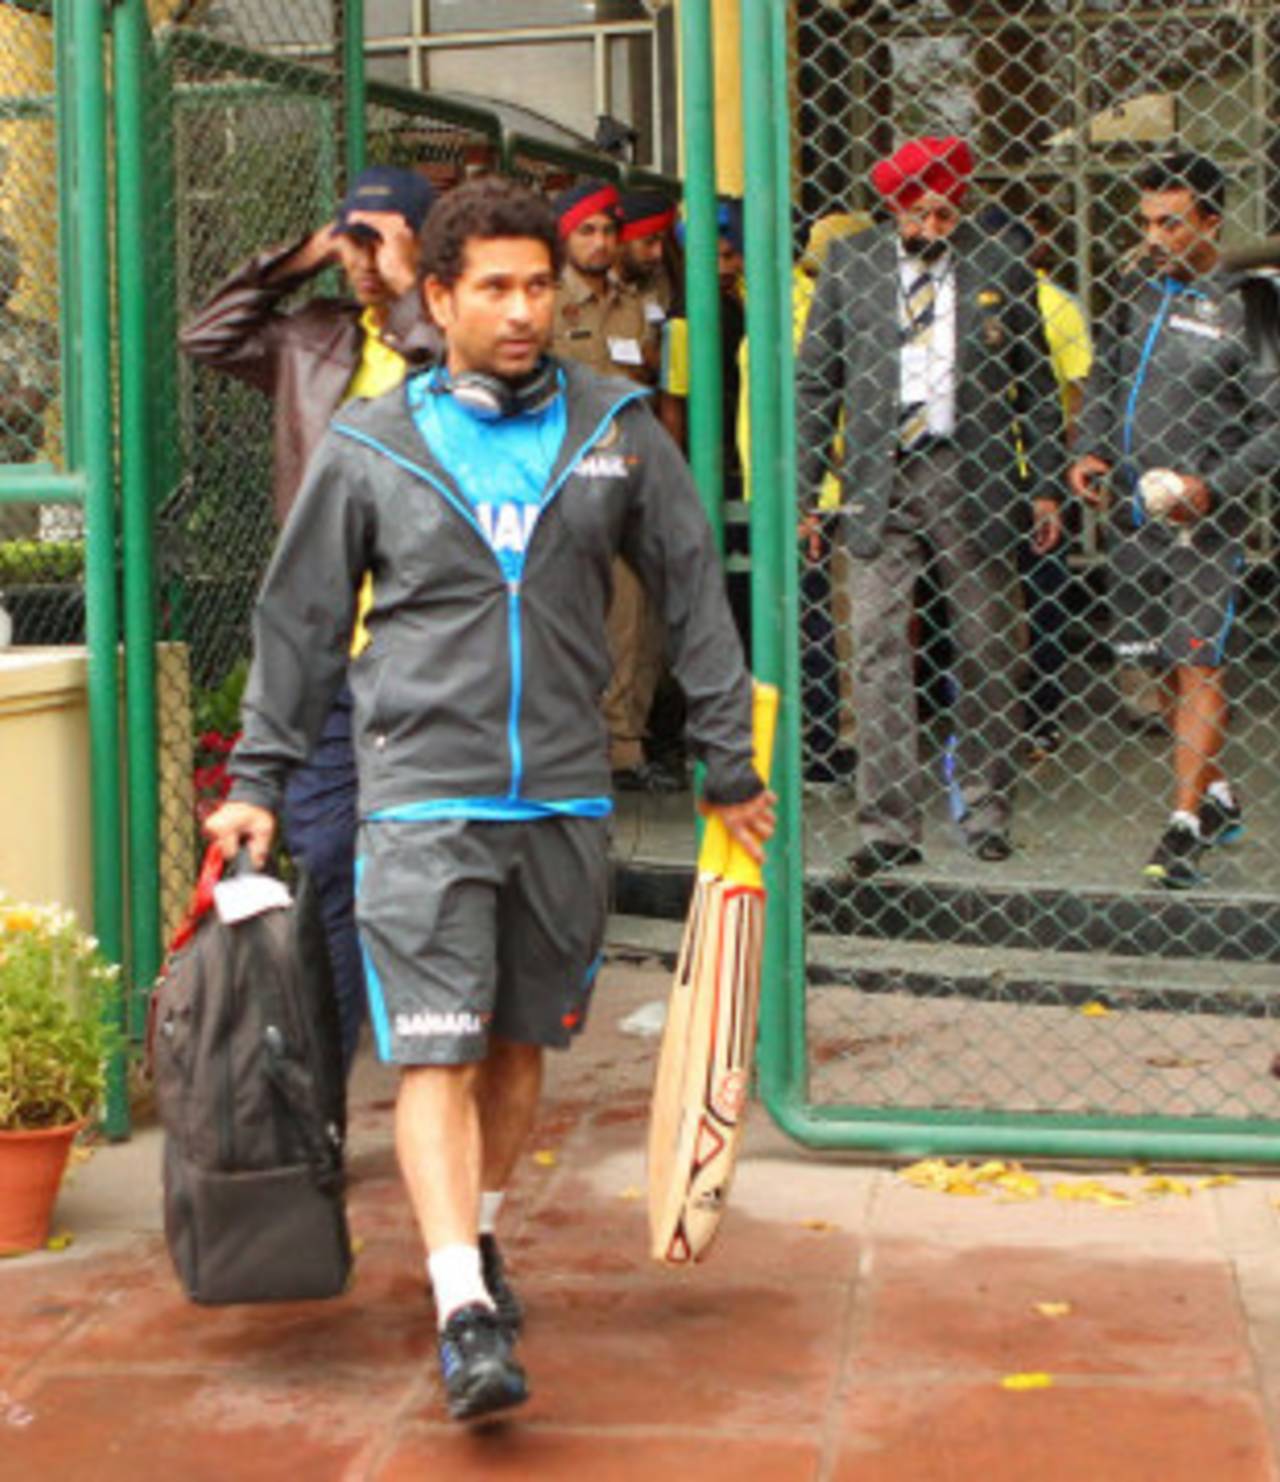 Sachin Tendulkar and members of the Indian team leave the stadium after the first day's play was washed out, India v Australia, 3rd Test, 1st Day, Mohali, March 14, 2013